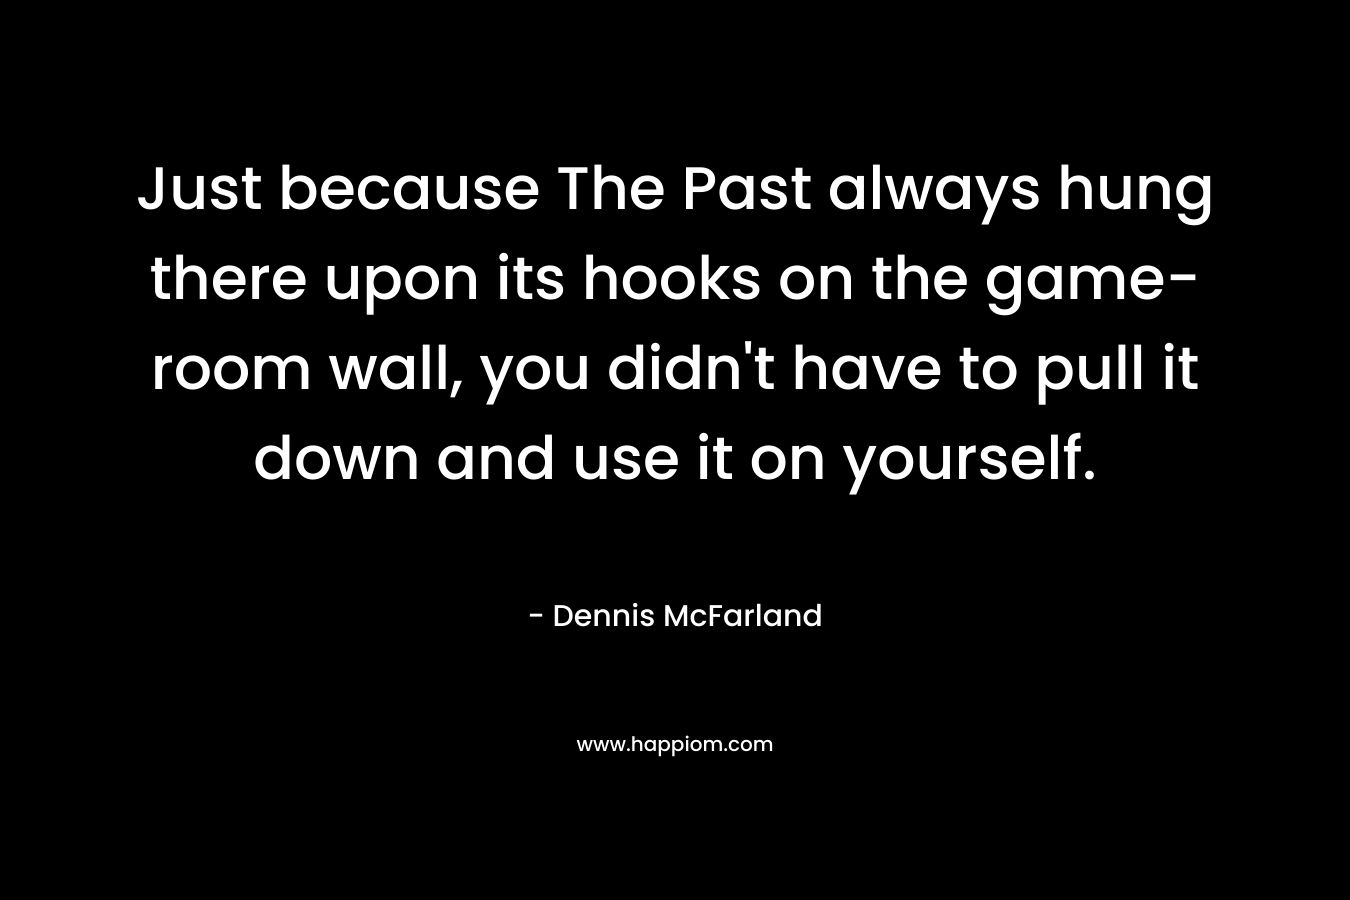 Just because The Past always hung there upon its hooks on the game-room wall, you didn’t have to pull it down and use it on yourself. – Dennis McFarland